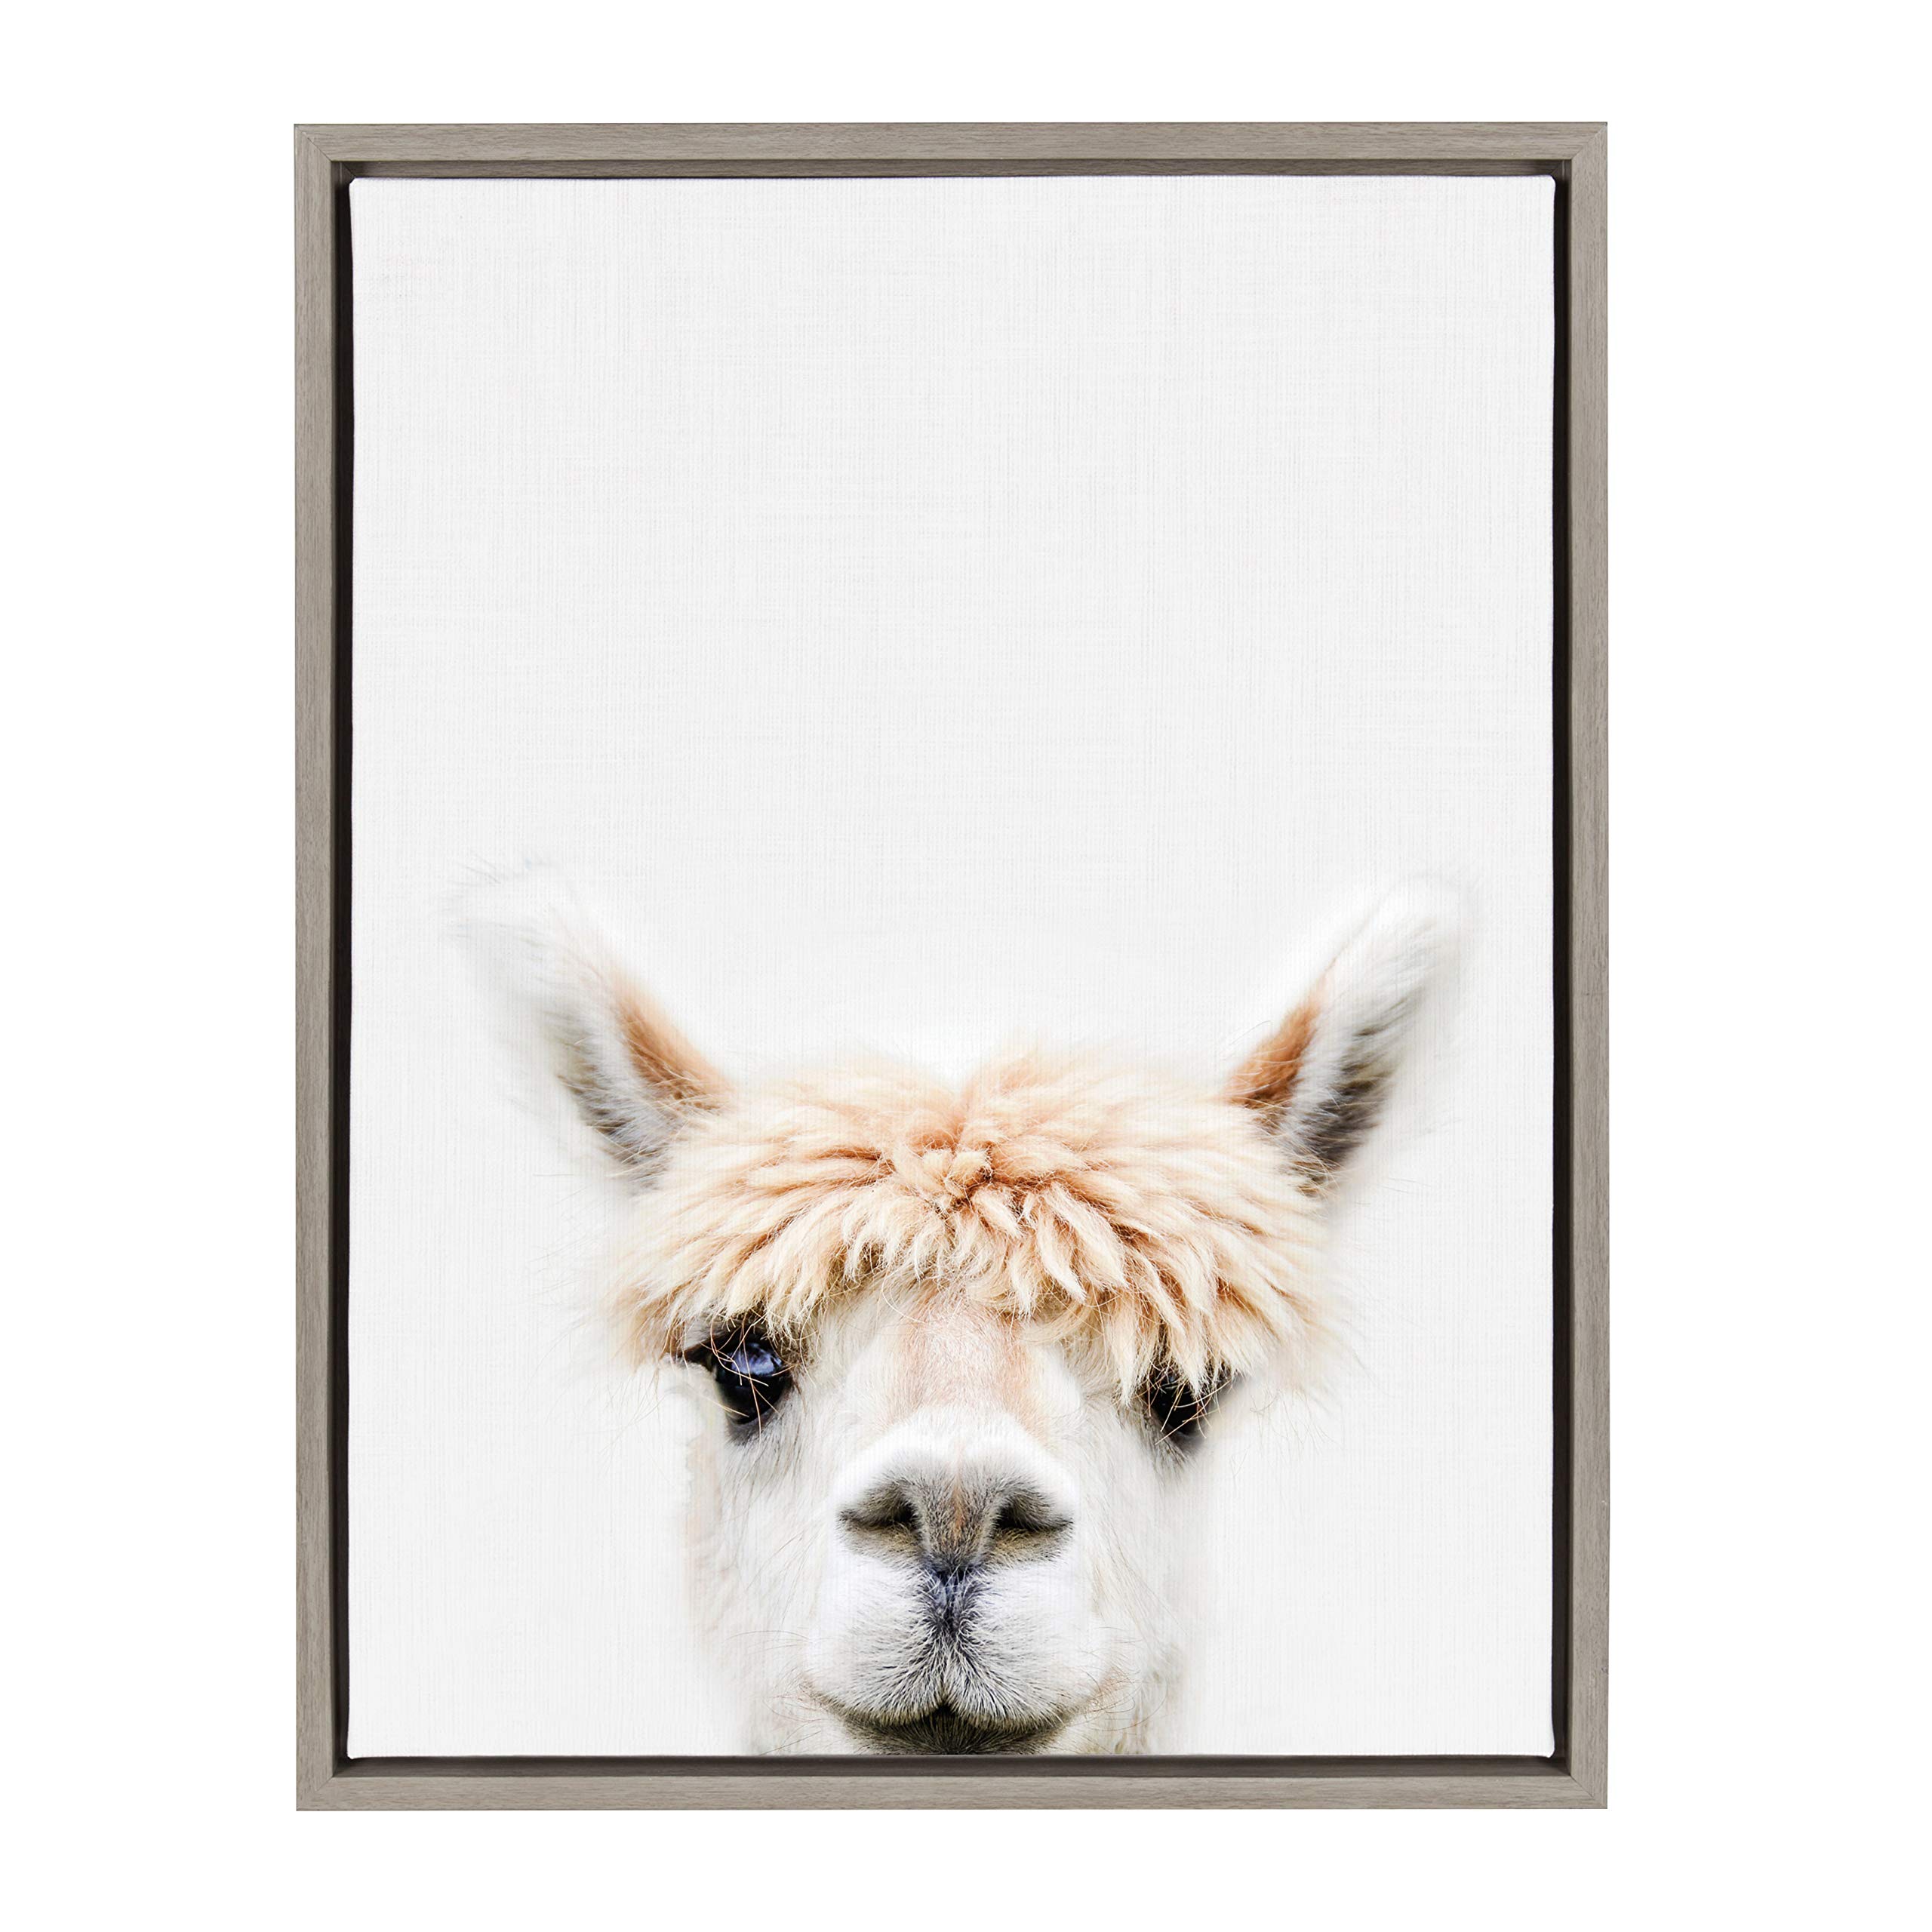 Kate and Laurel Sylvie Alpaca Bangs Animal Print Portrait Framed Canvas Wall Art by Amy Peterson, 18x24 Gray